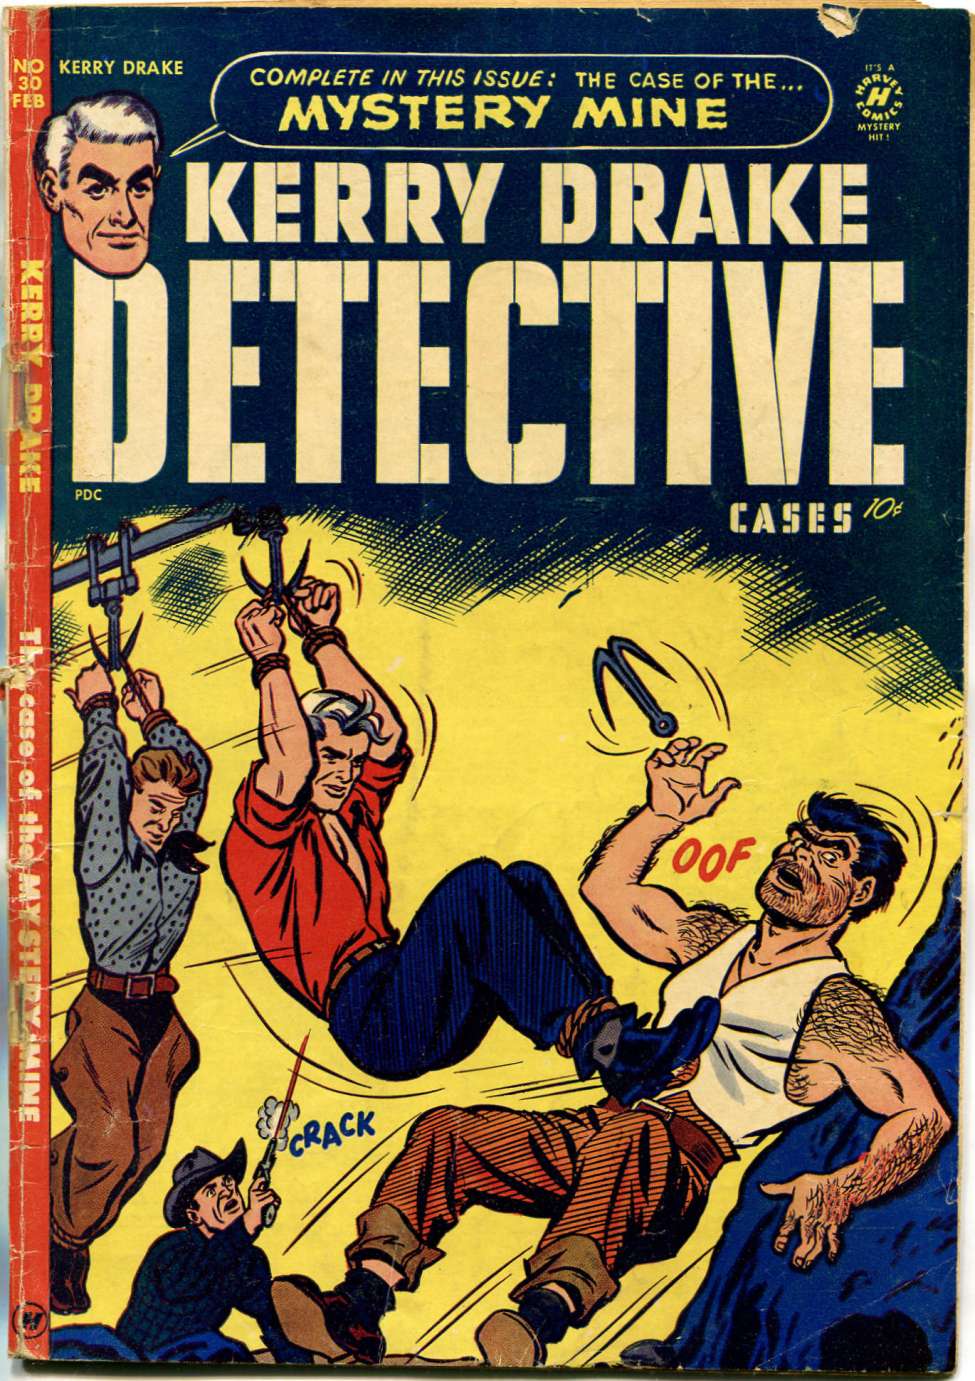 Comic Book Cover For Kerry Drake Detective Cases 30 - Version 2